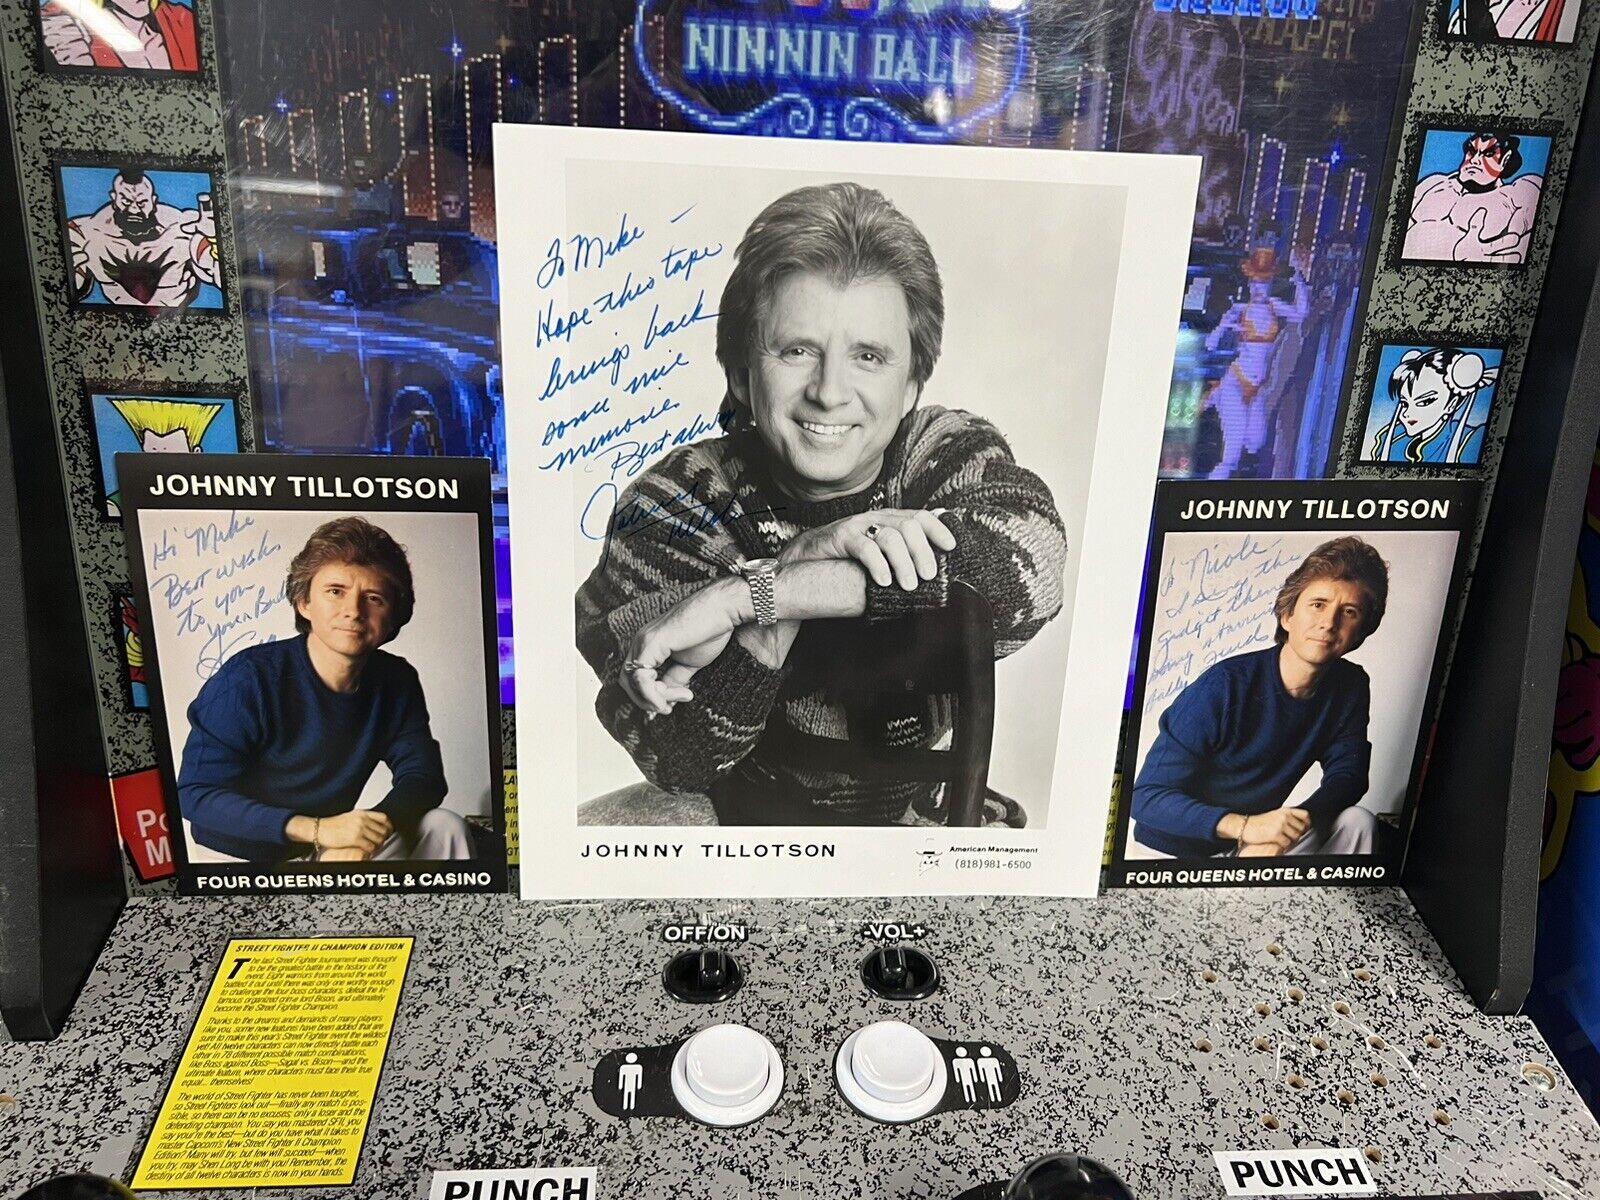 Johnny Tillotson Signed Autographed 8x10 Photo + 2 Signed Postcards Personalized